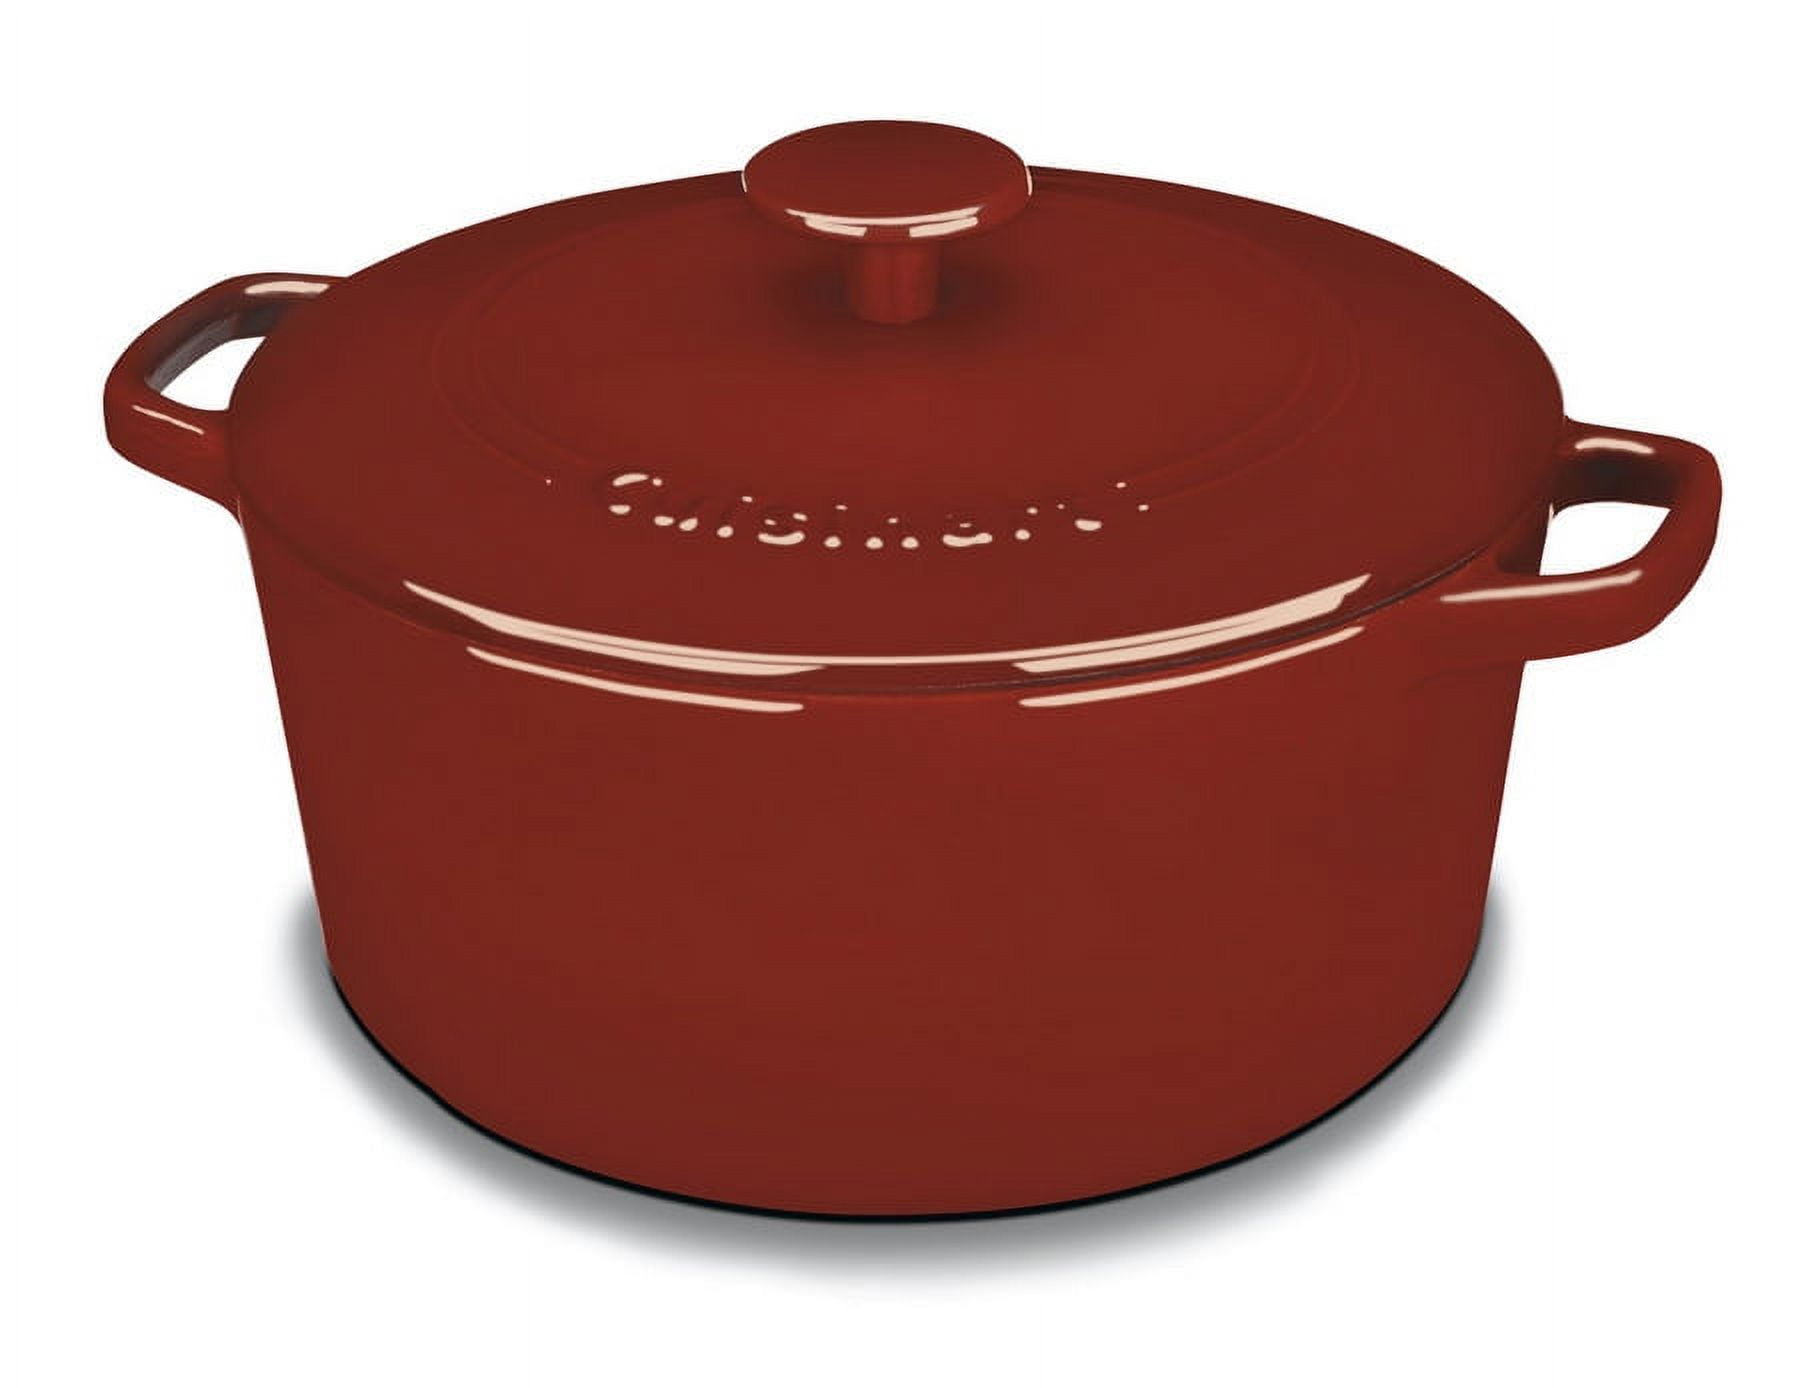 Bring a 5.5-qt. oven- and stovetop-ready Cuisinart cast iron dish home at  $50 (Reg. $80+)